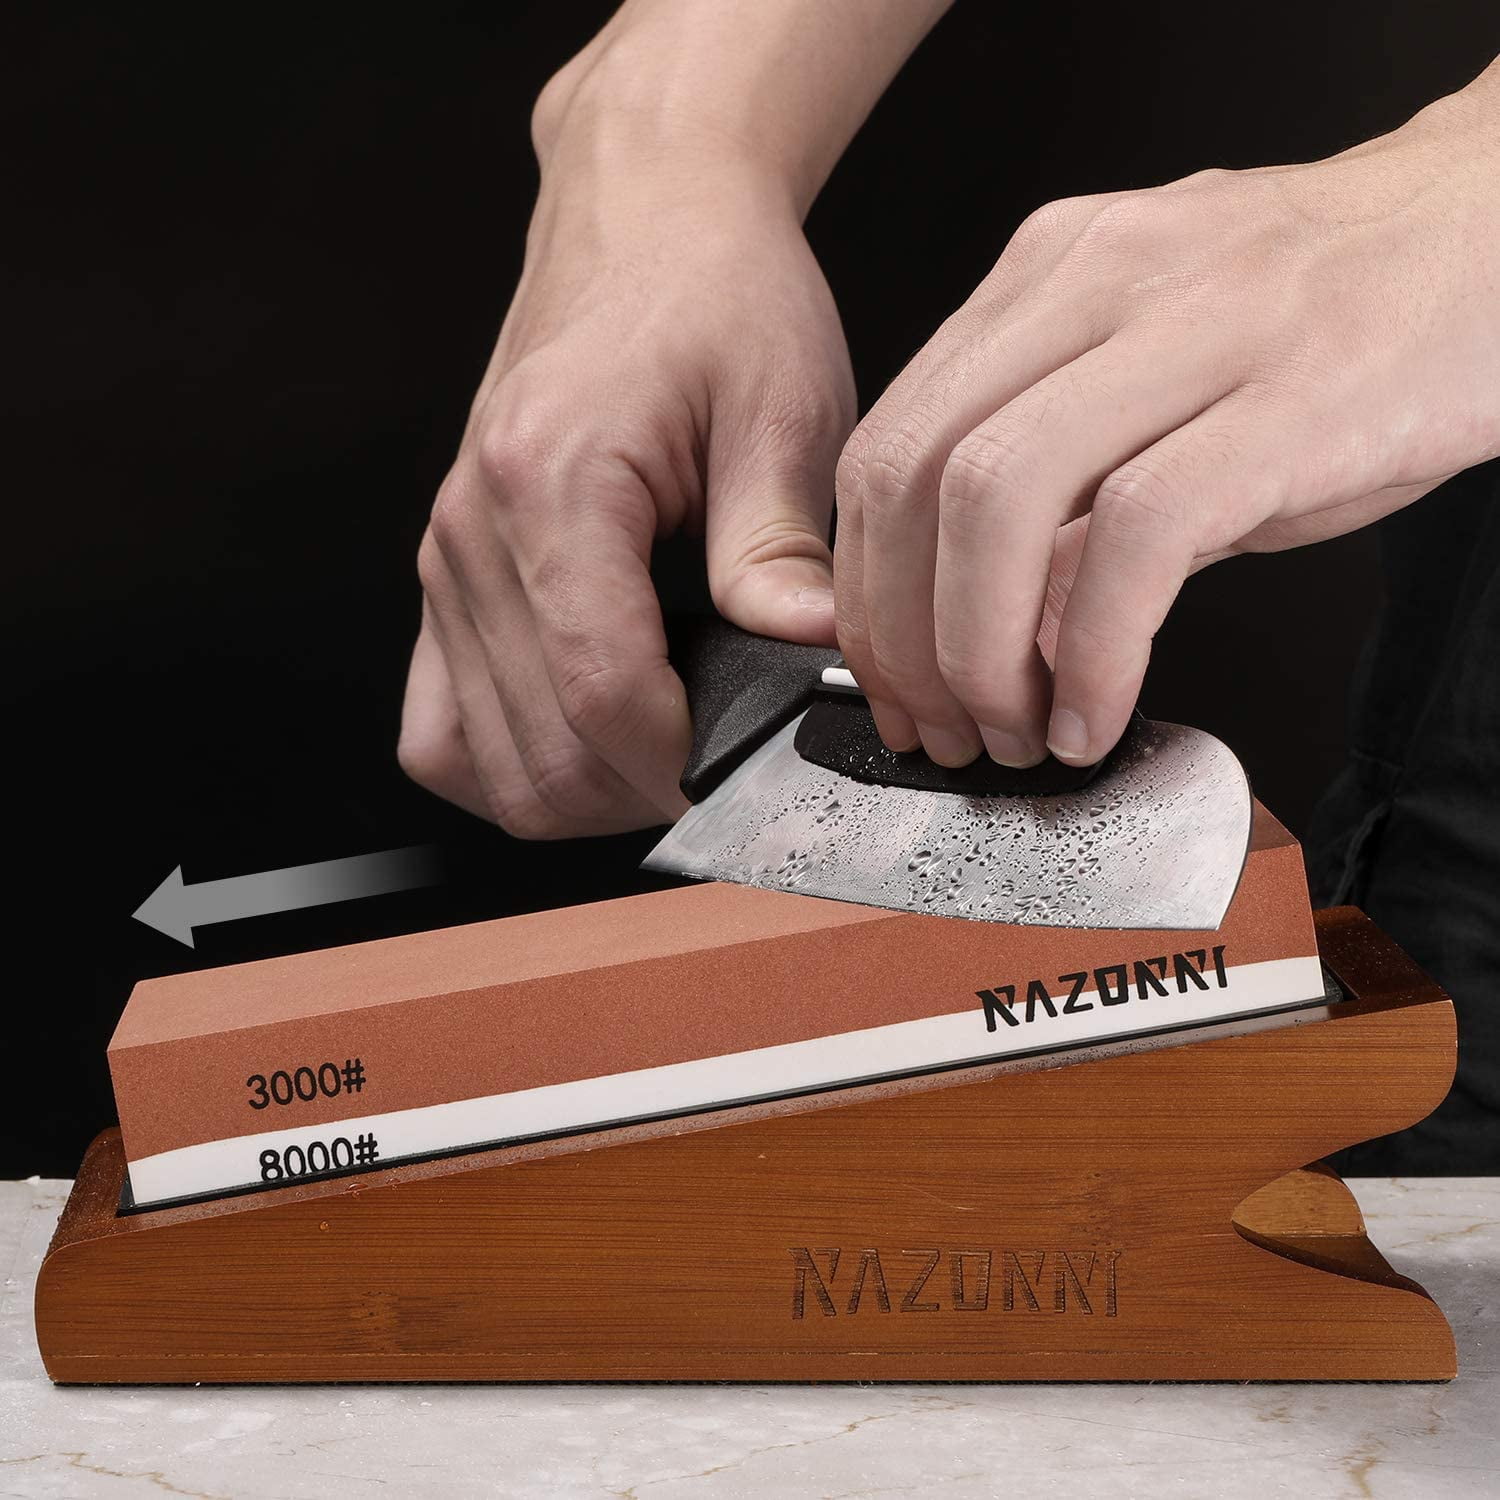 Razorri Solido Angle Guide 2-Double-Sided 400/1000 and 3000/8000 Grit Whetstones Knife Sharpening Stone Kit with Leather Strop